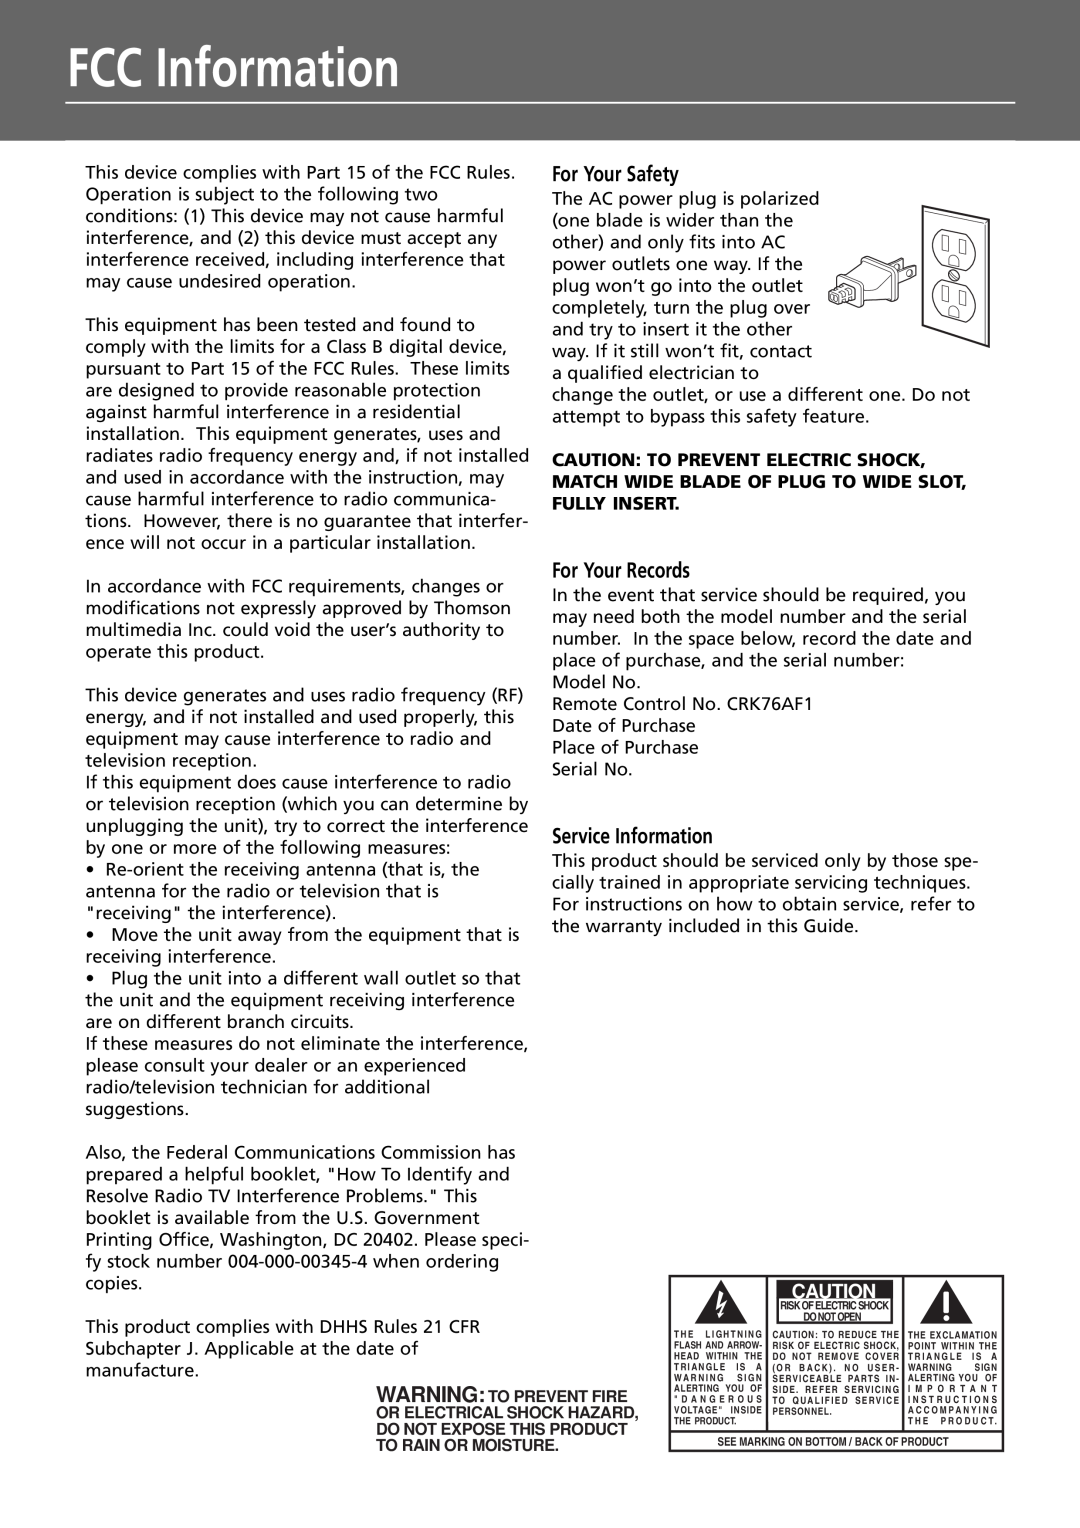 RCA RTDVD1 user manual FCC Information, For Your Safety, For Your Records, Service Information 